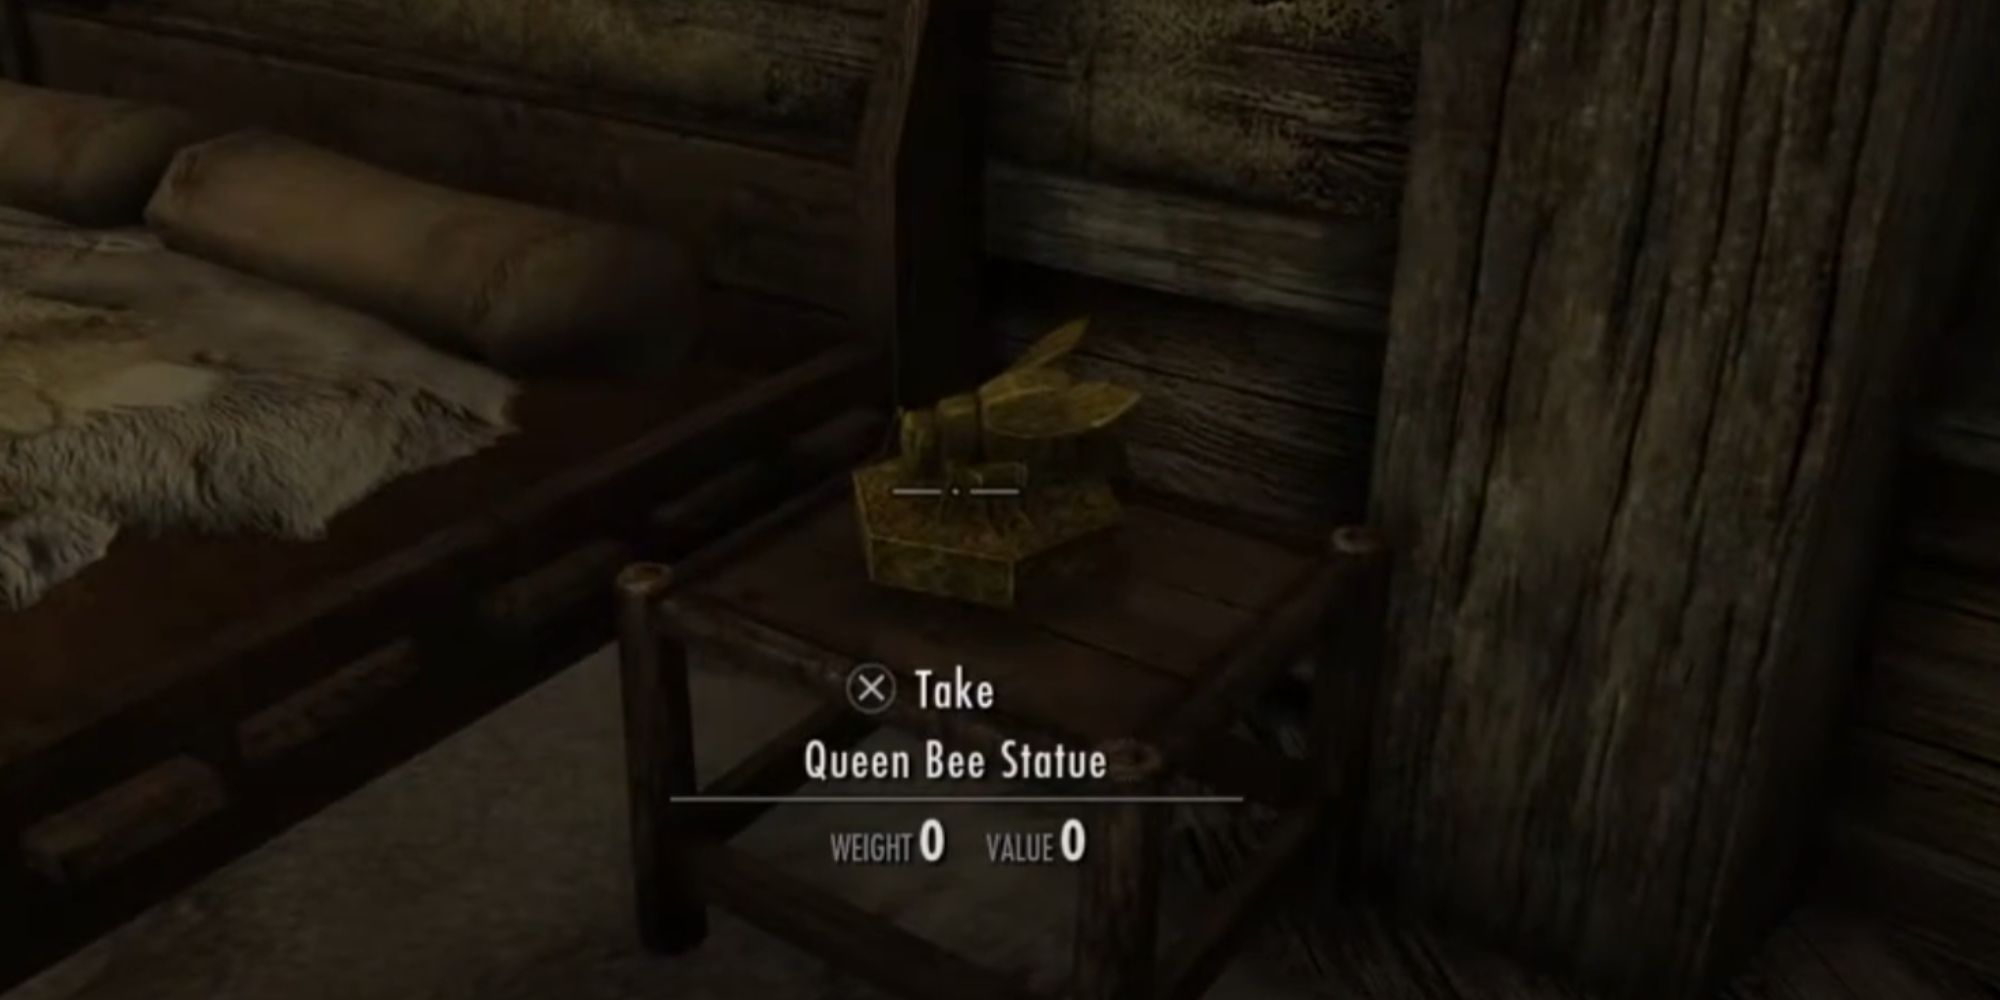 skyrim_queen_bee_statue_on_table